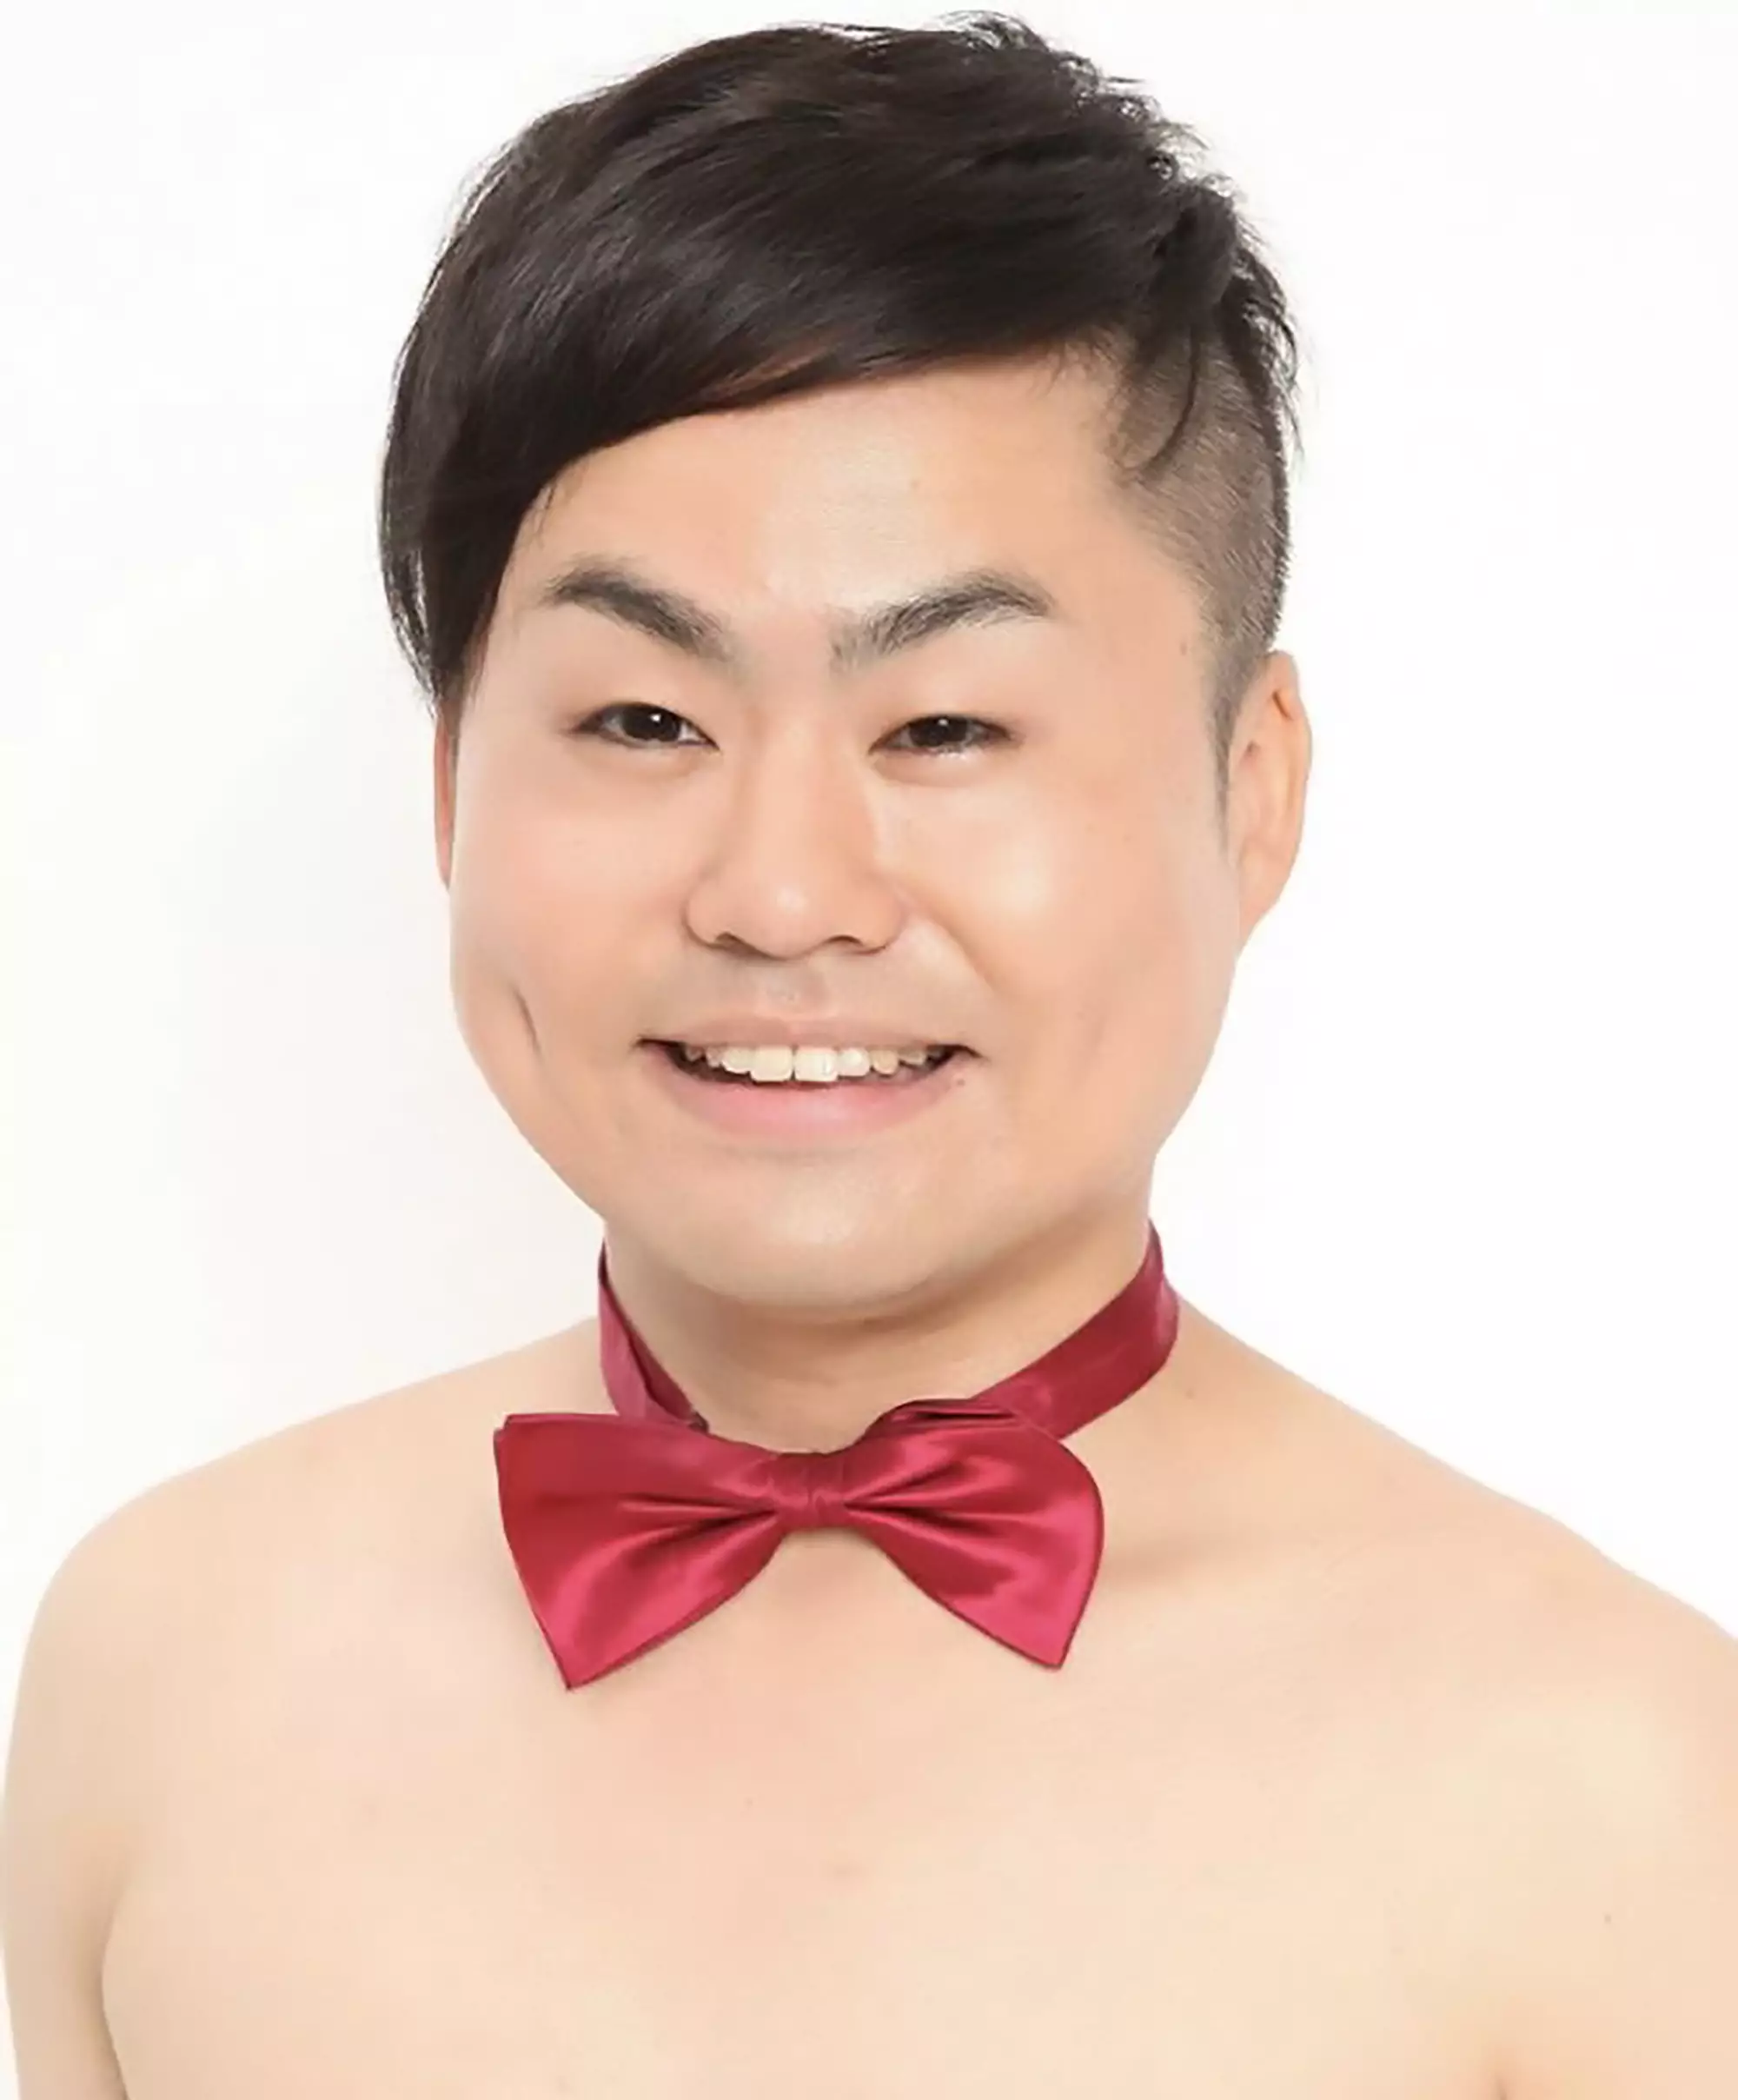 Kazuhisa Uekusa made it to the semi-finals of Britain's Got Talent with his nude tablecloth trick.